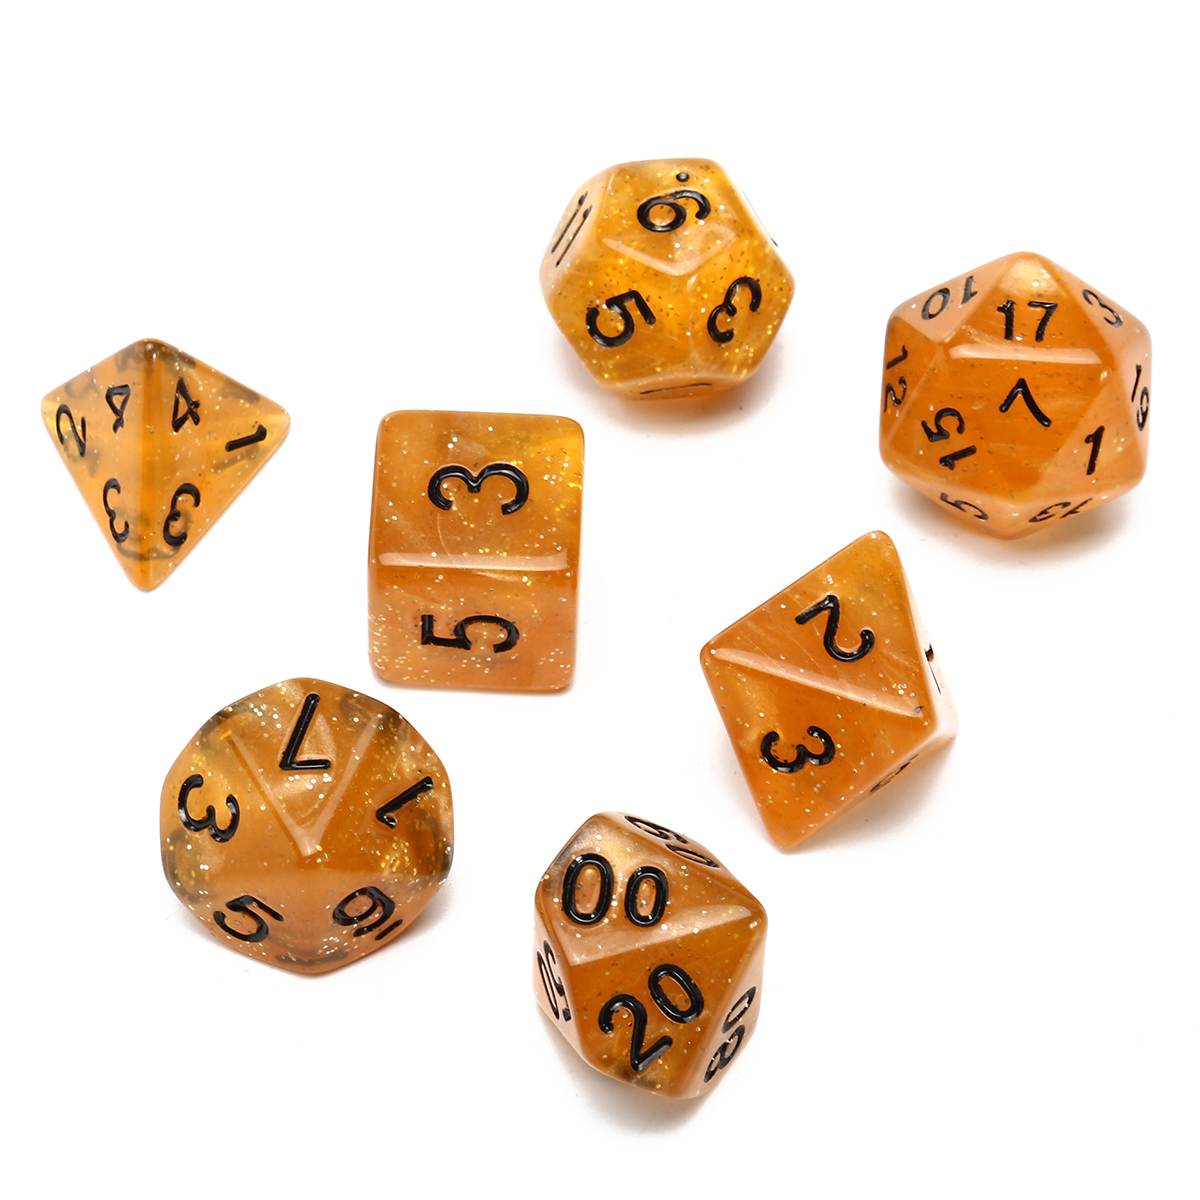 

7 Piece Polyhedral Dice Set Multisided Dice With Dice Bag RPG Role Playing Games Dices Gadget